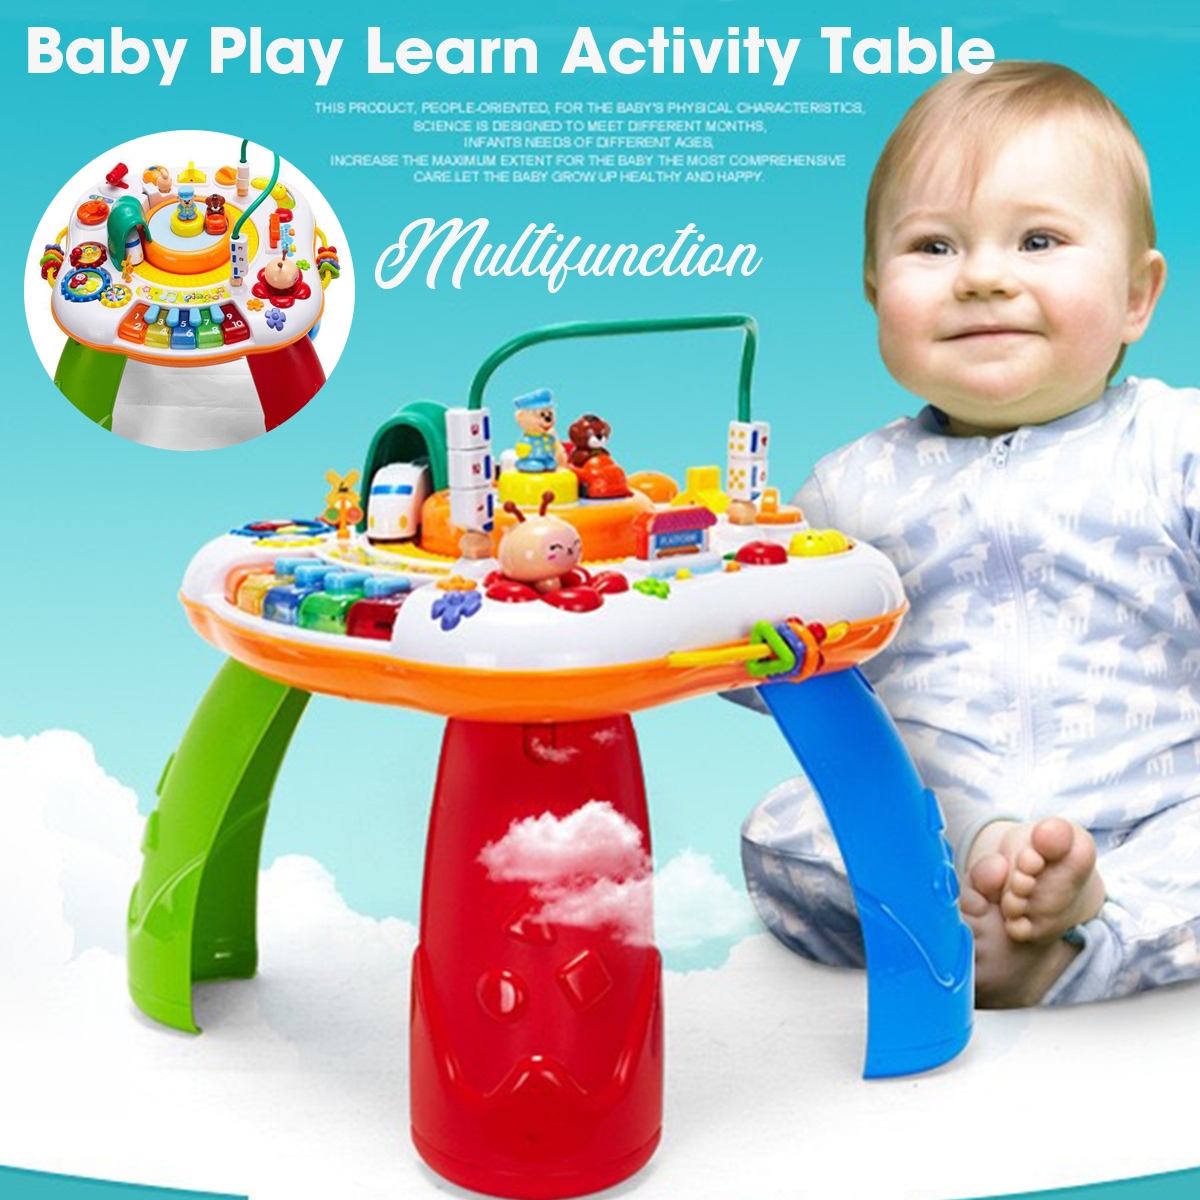 Multi-function Mini Baby Playing Learn Activity Game Table Toys for Kids Gift